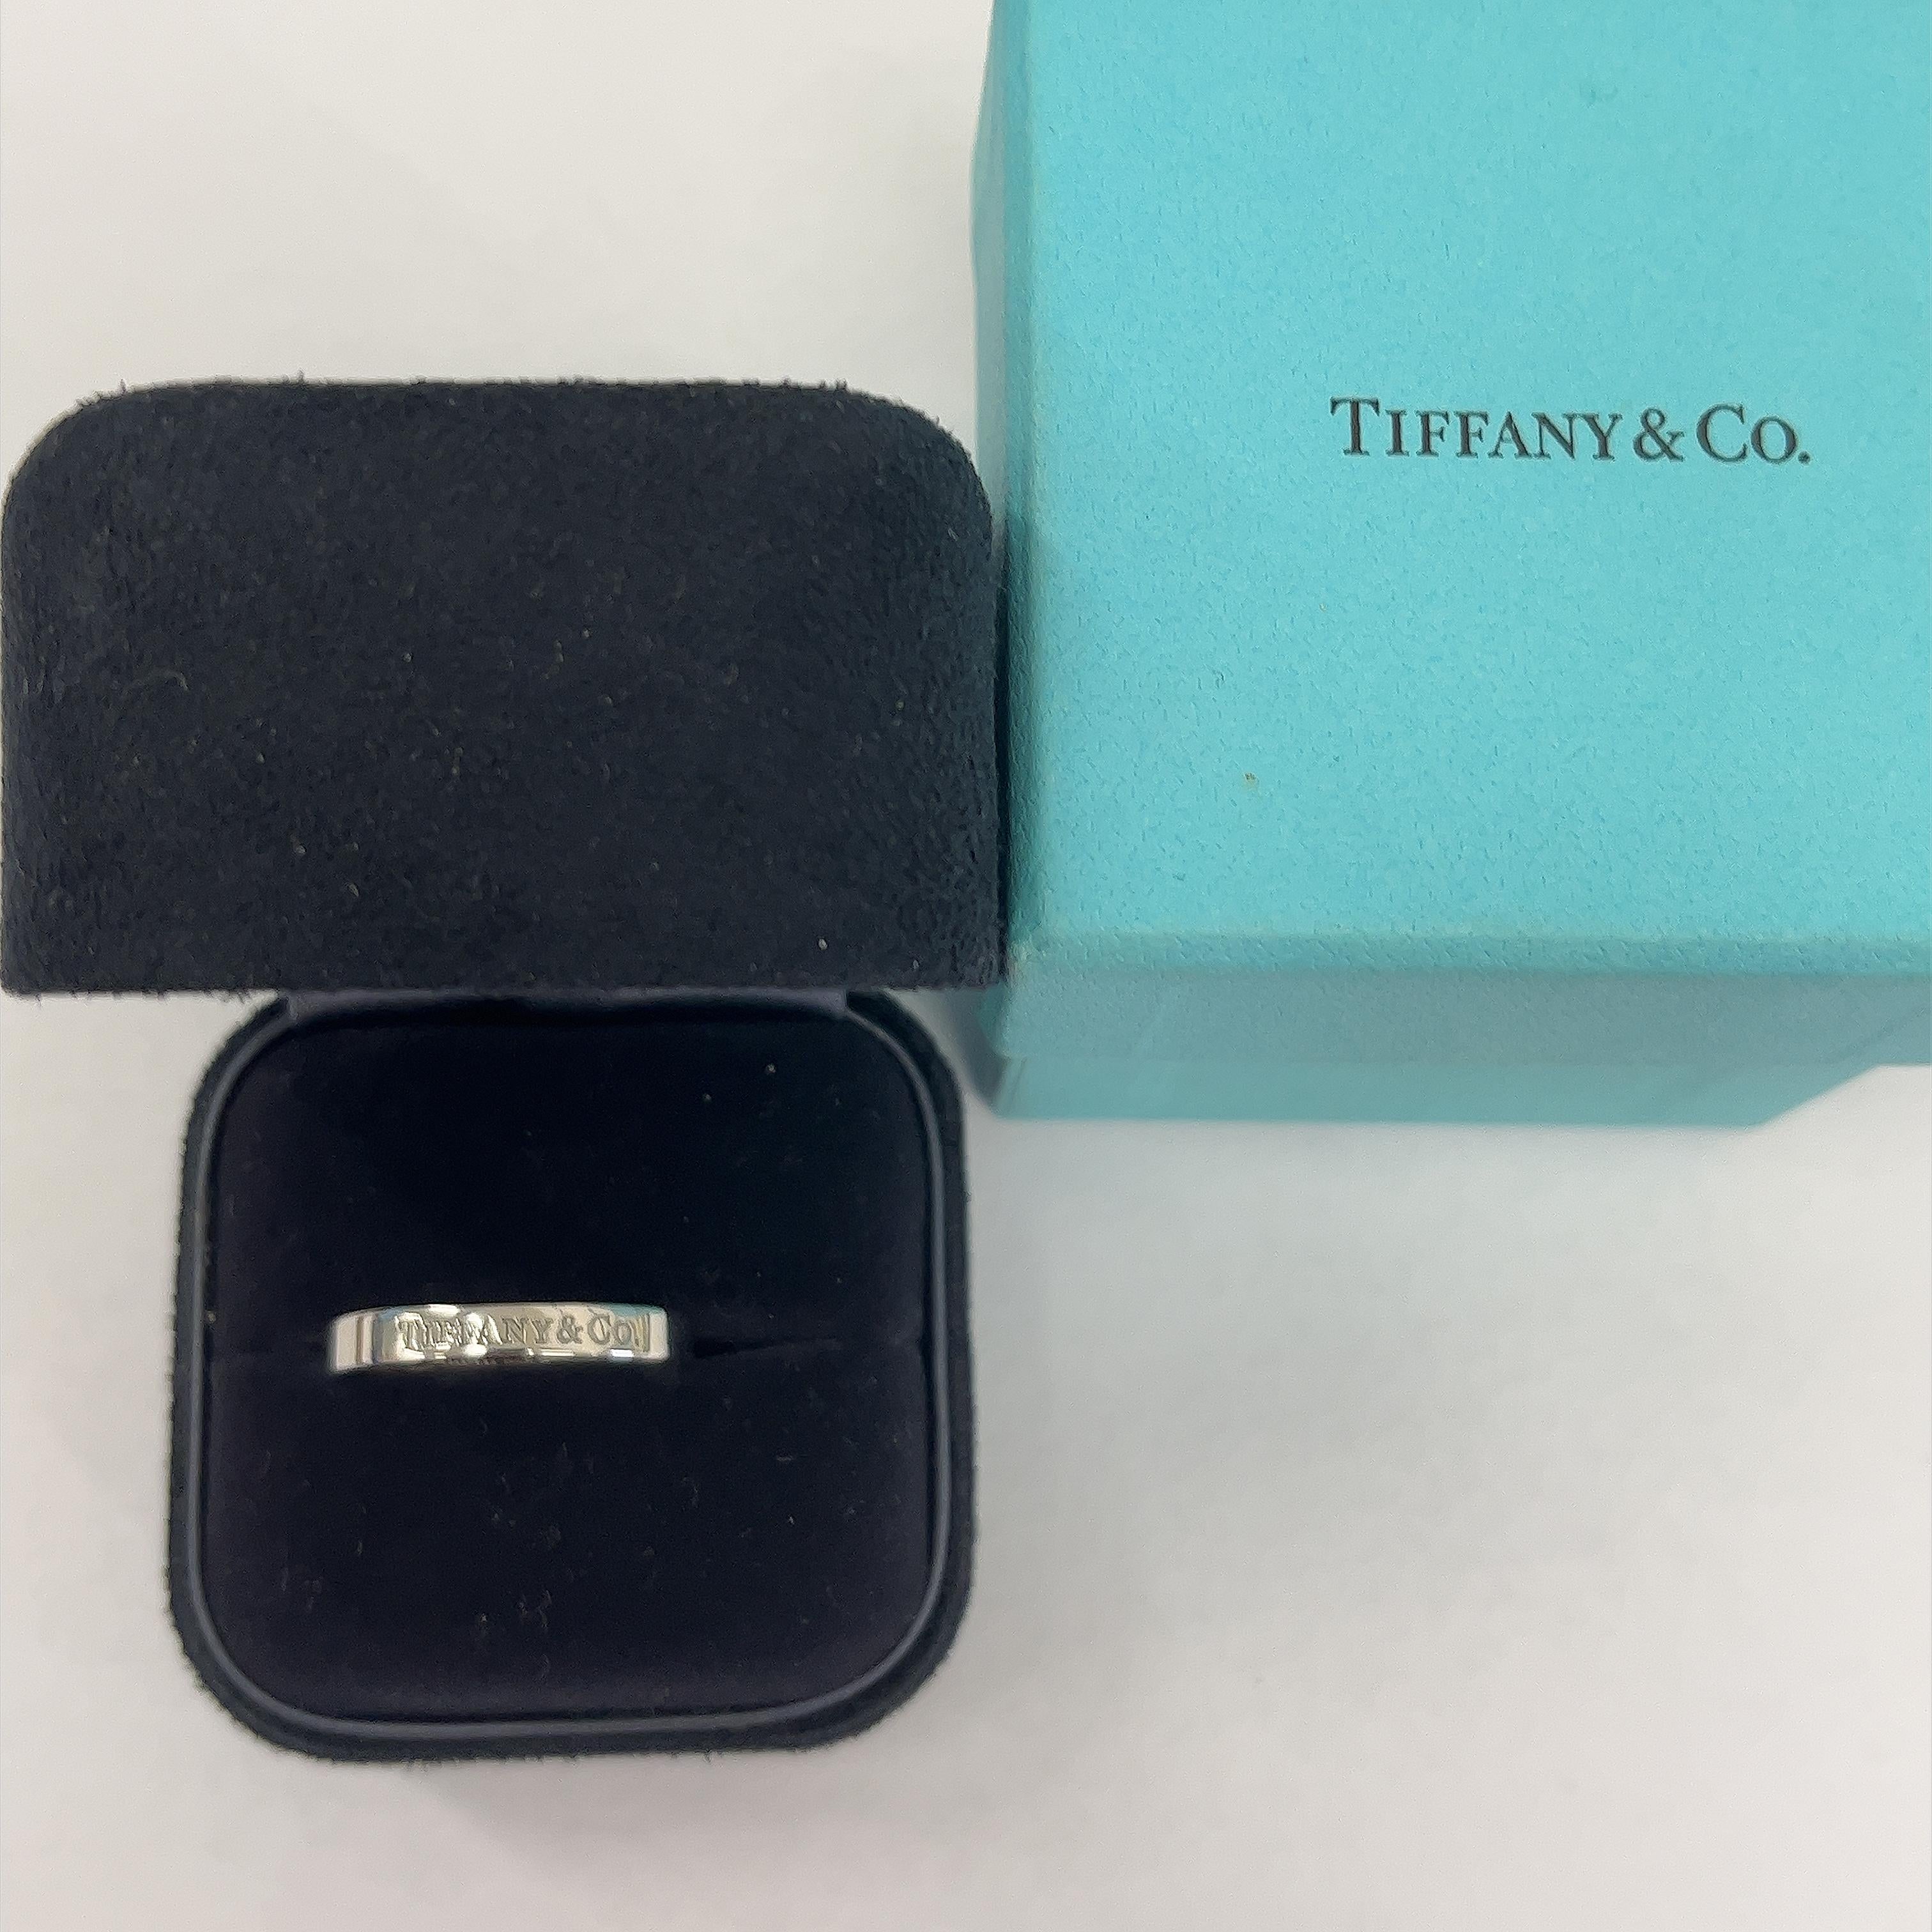 Exuding timeless sophistication, the Tiffany & Co. Platinum Flat Band features a sleek design with the iconic 